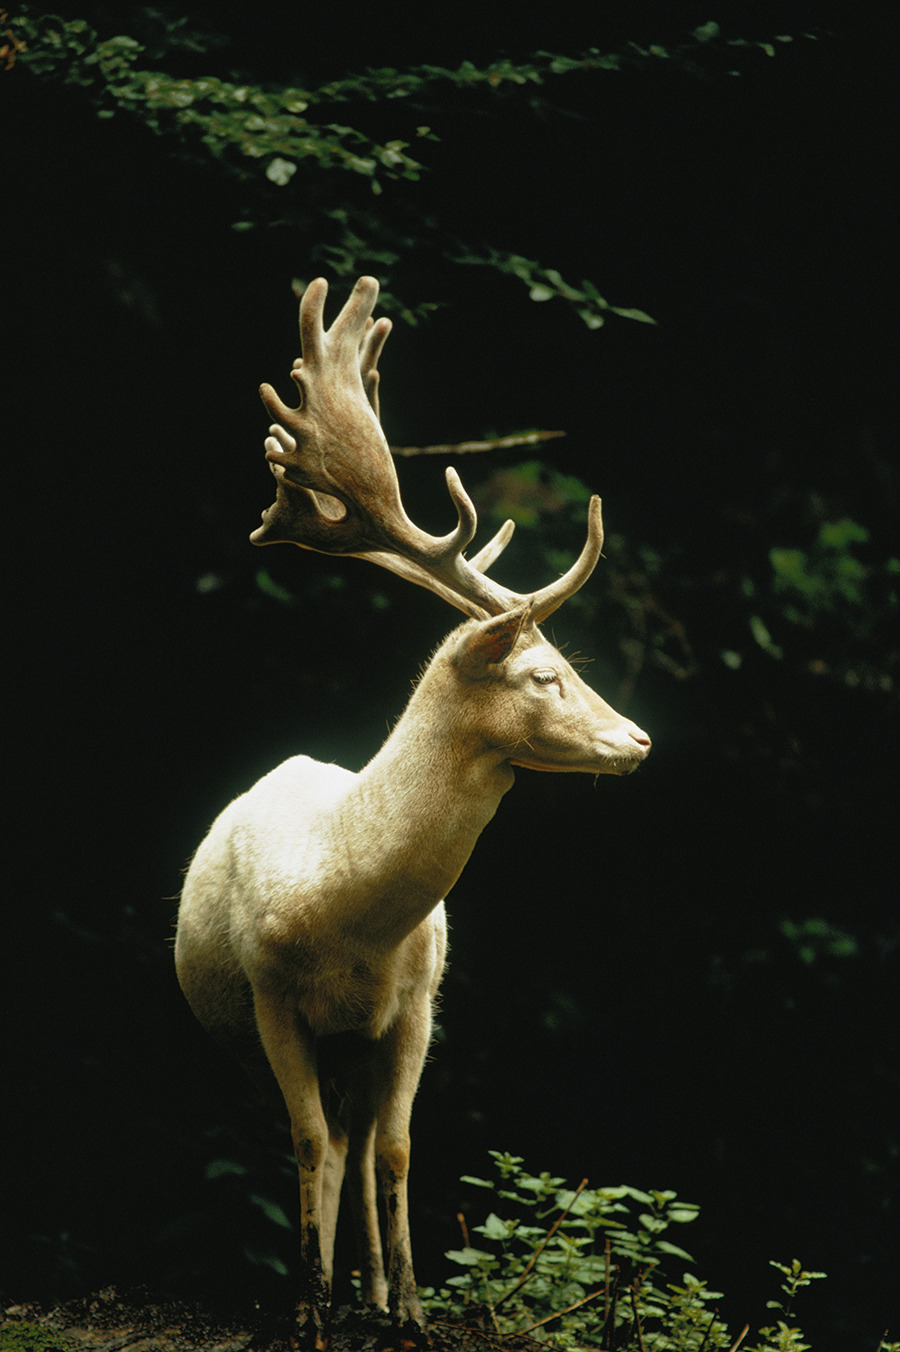 A white fallow stag stands in a forest in Switzerland, 1973.Photograph by James P. Blair, National Geographic Creative